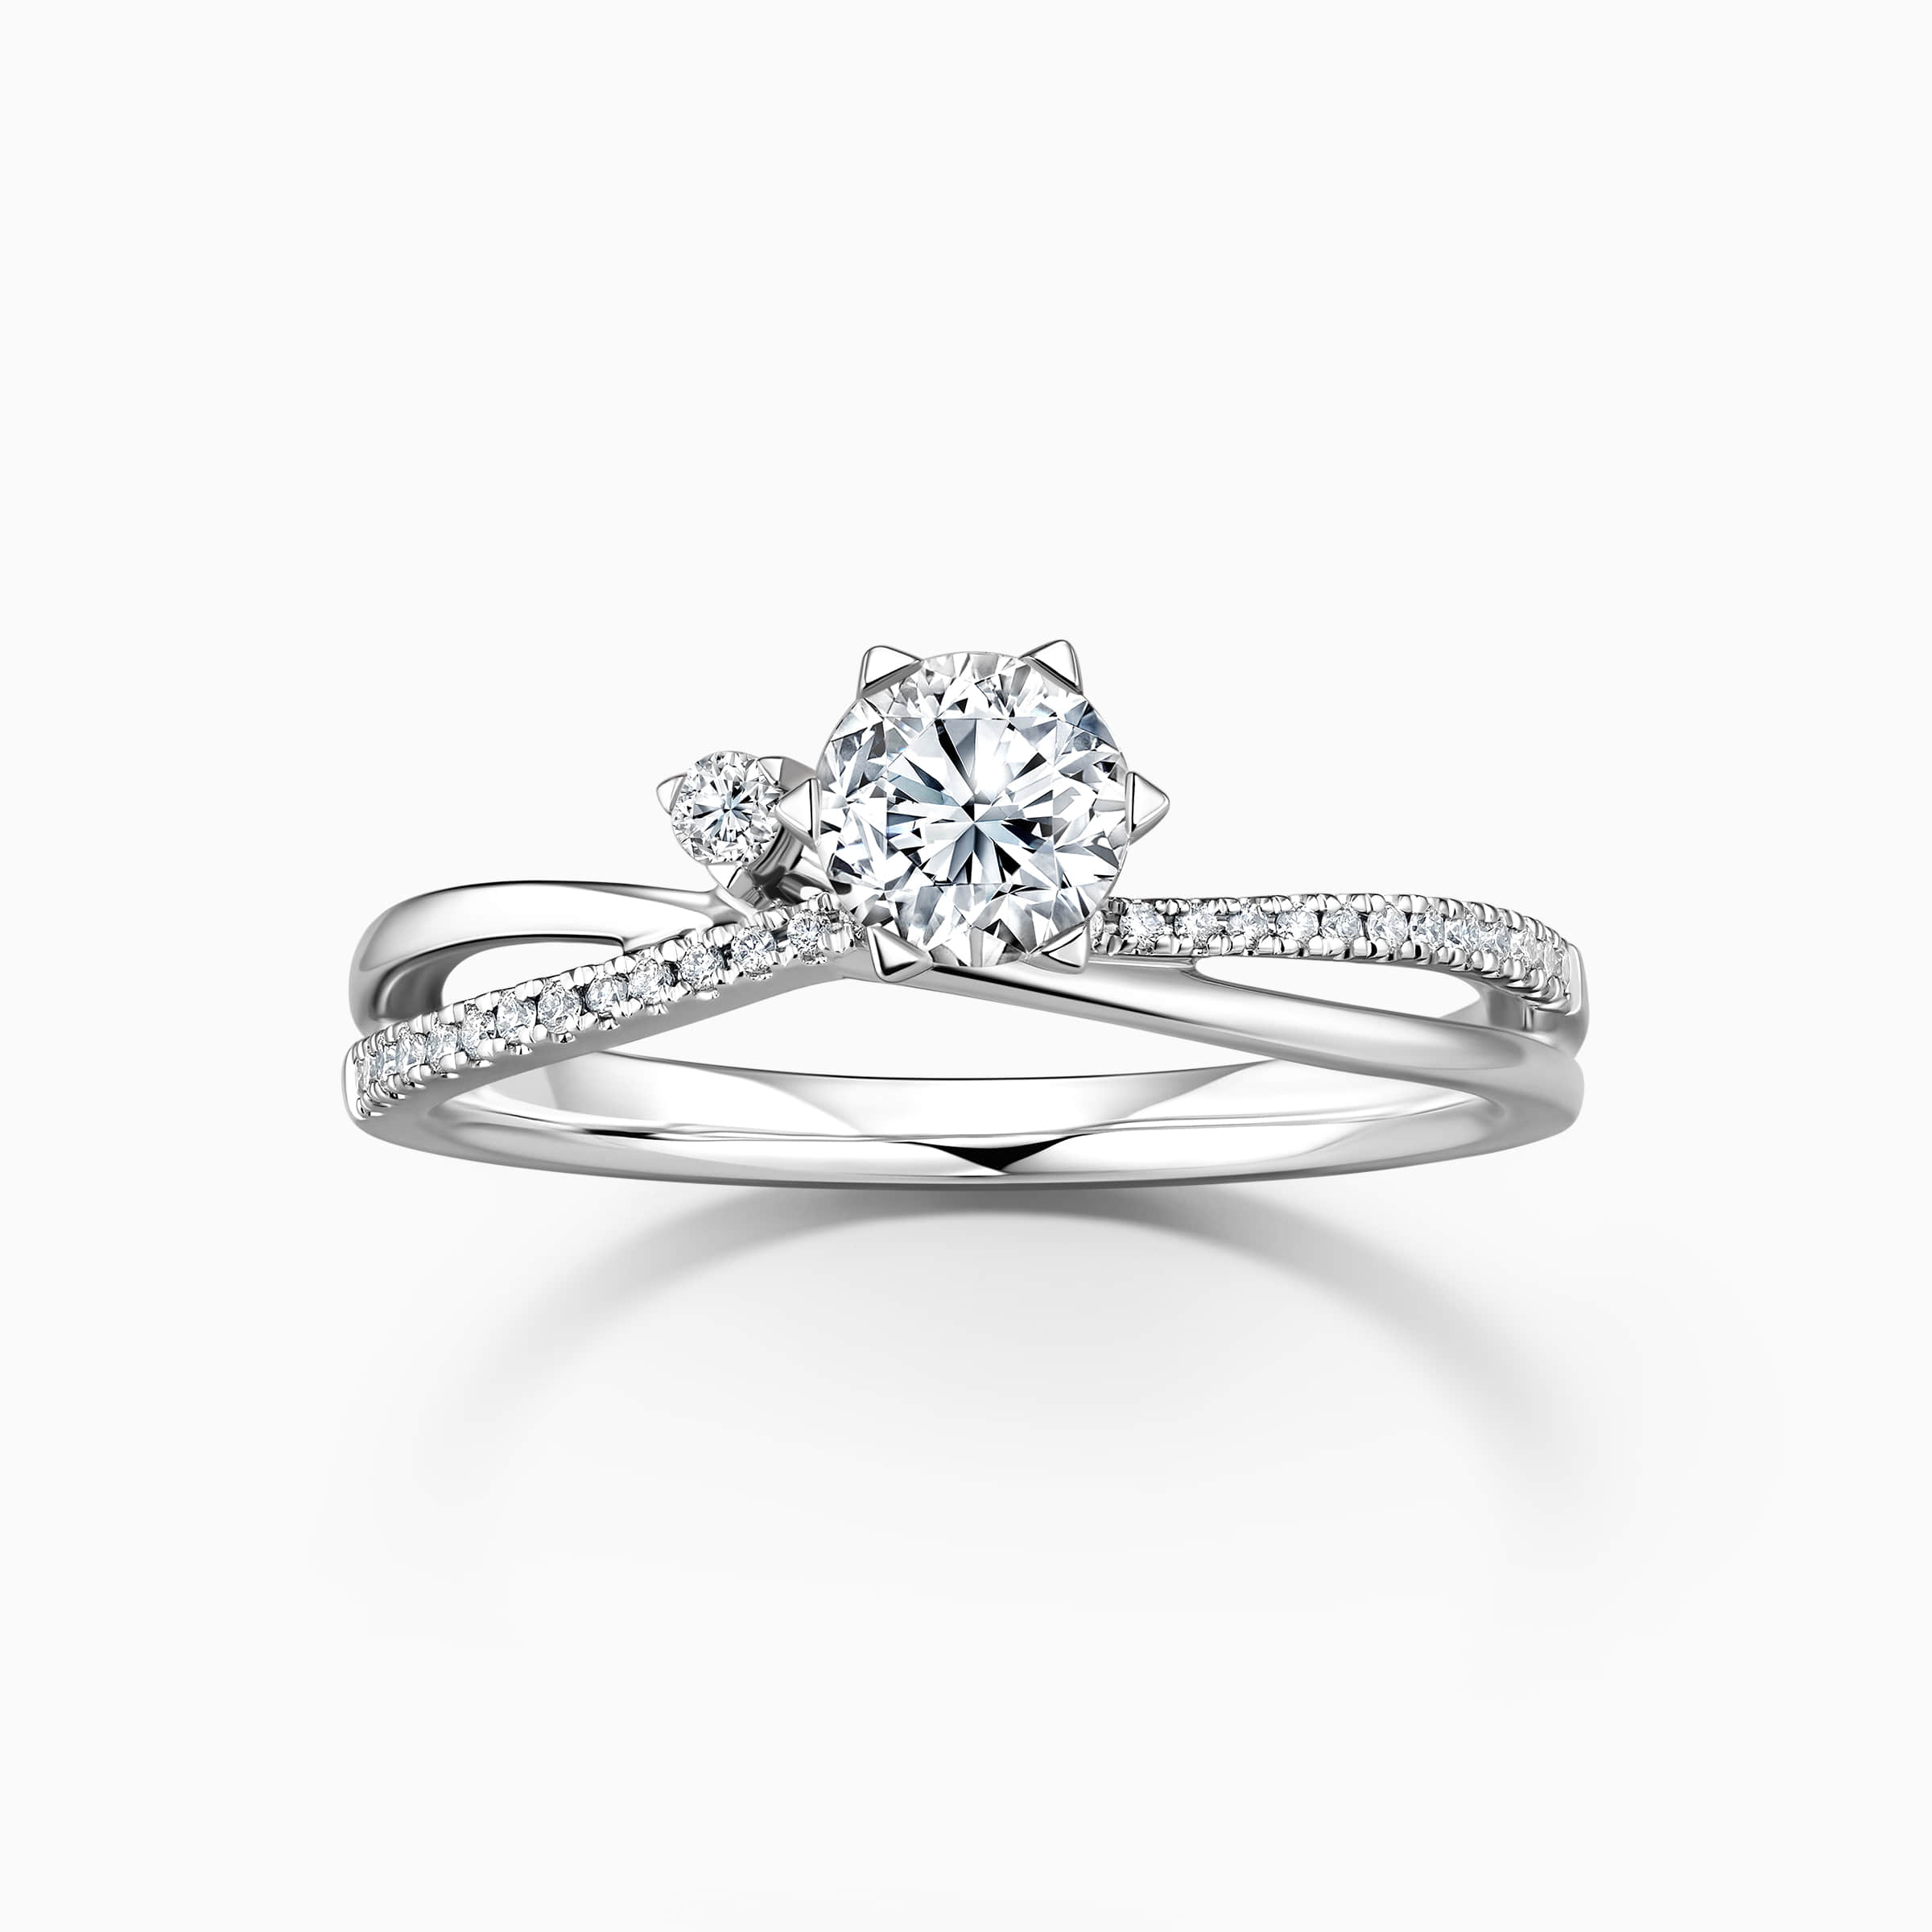 Darry Ring 2 stone promise ring white gold